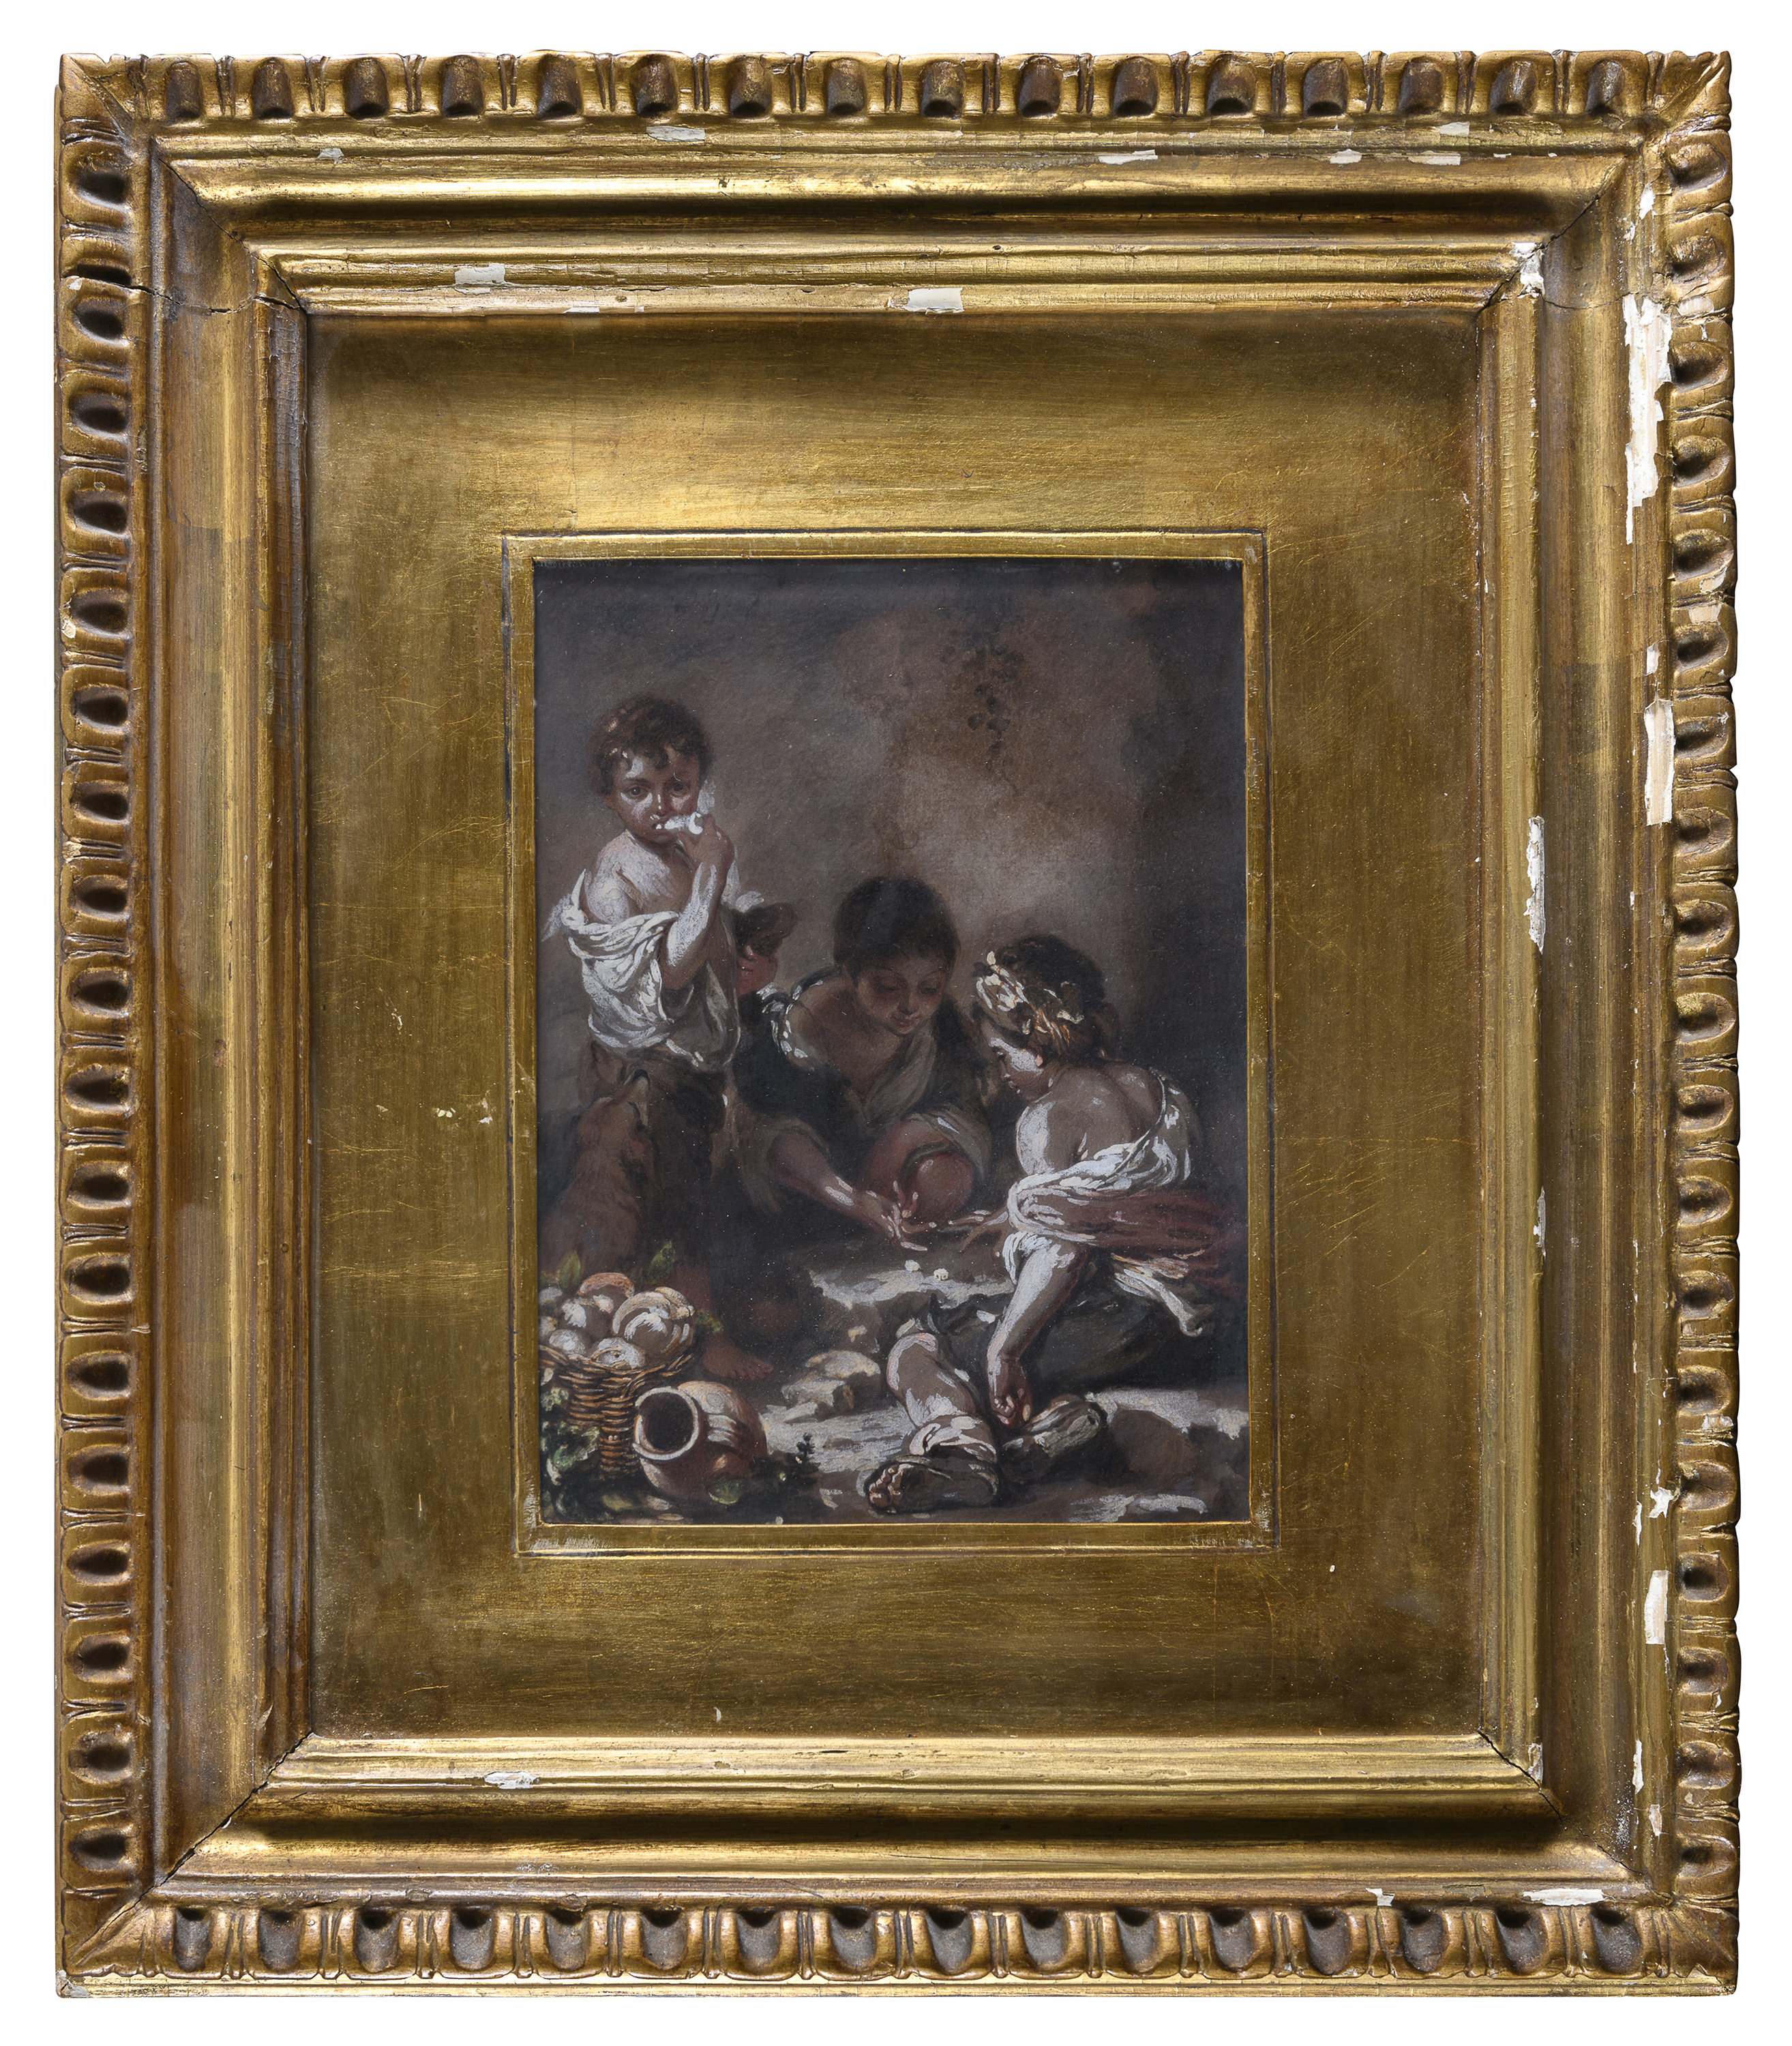 PAIR OF NEAPOLITAN OIL PAINTINGS END OF THE 19TH CENTURY - Image 2 of 4